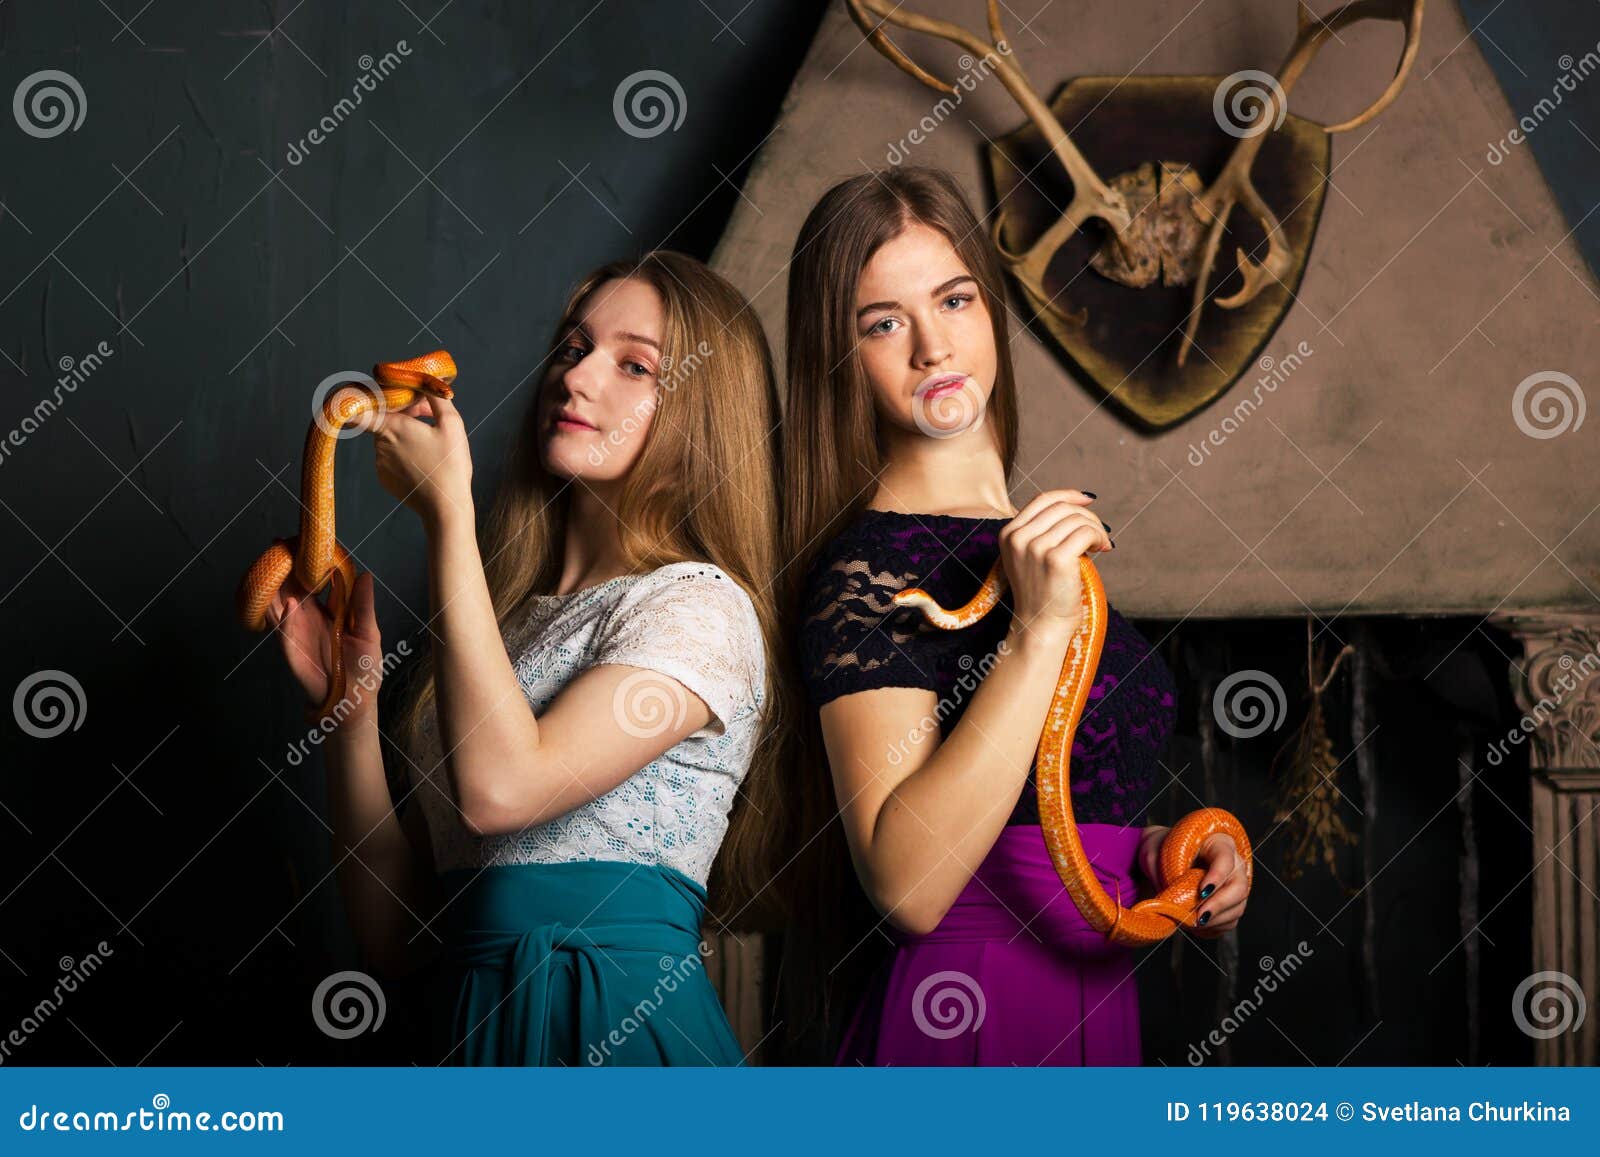 Girls with snakes